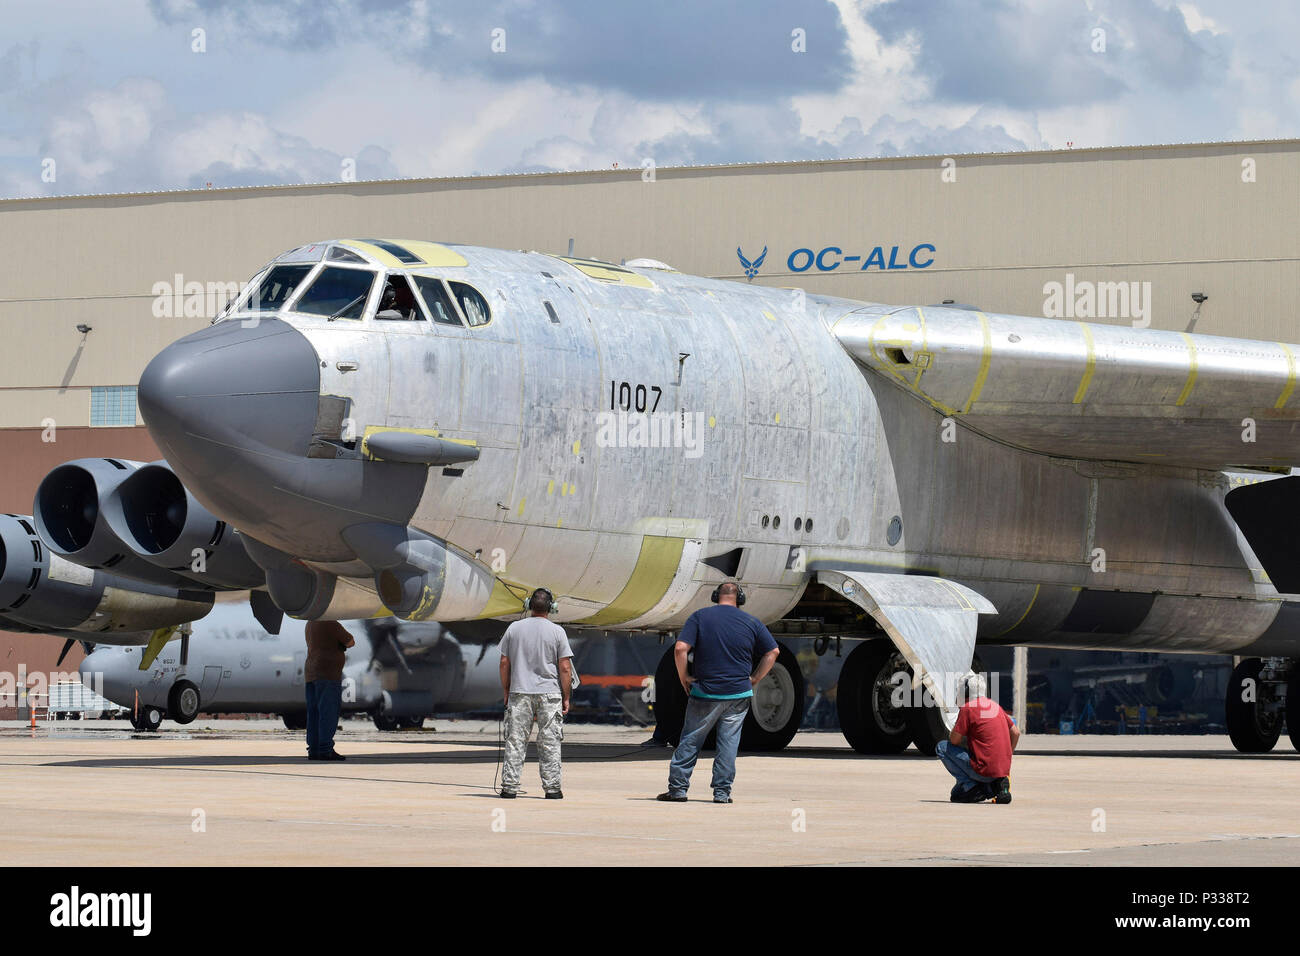 Maintenance personnel from the 565th Aircraft Maintenance Squadron work under and around B-52H 61-0007, 'Ghost Rider,' as the aircraft undergoes checks for an attempted functional test flight at the Oklahoma City Air Logistics Complex, Aug. 29, 2016, Tinker Air Force Base, Okla. 'OC-ALC' can be seen written on the hangar in the background as 'Ghost Rider' shines in natural metal as it completes a 19-month overhaul and upgrade to become the first B-52 to ever be regenerated from long-term storage with the 309th Aerospace Maintenance and Regeneration Group at Davis-Monthan AFB, Ariz., and return Stock Photo